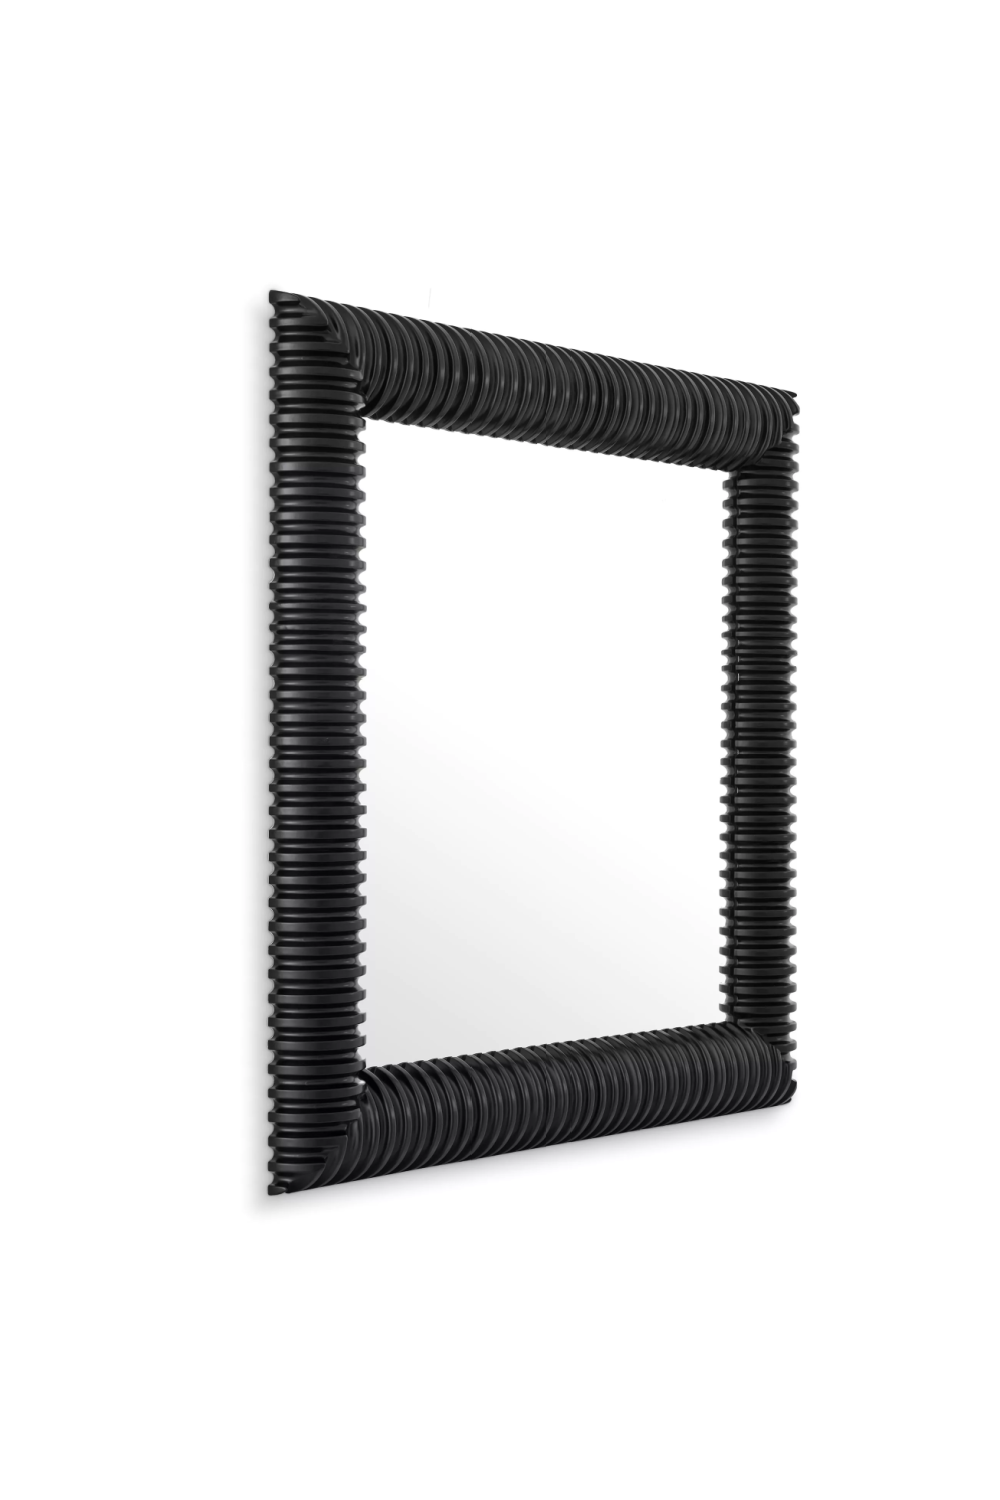 Square Wooden Framed Mirror | Eichholtz Museo | OROA.com